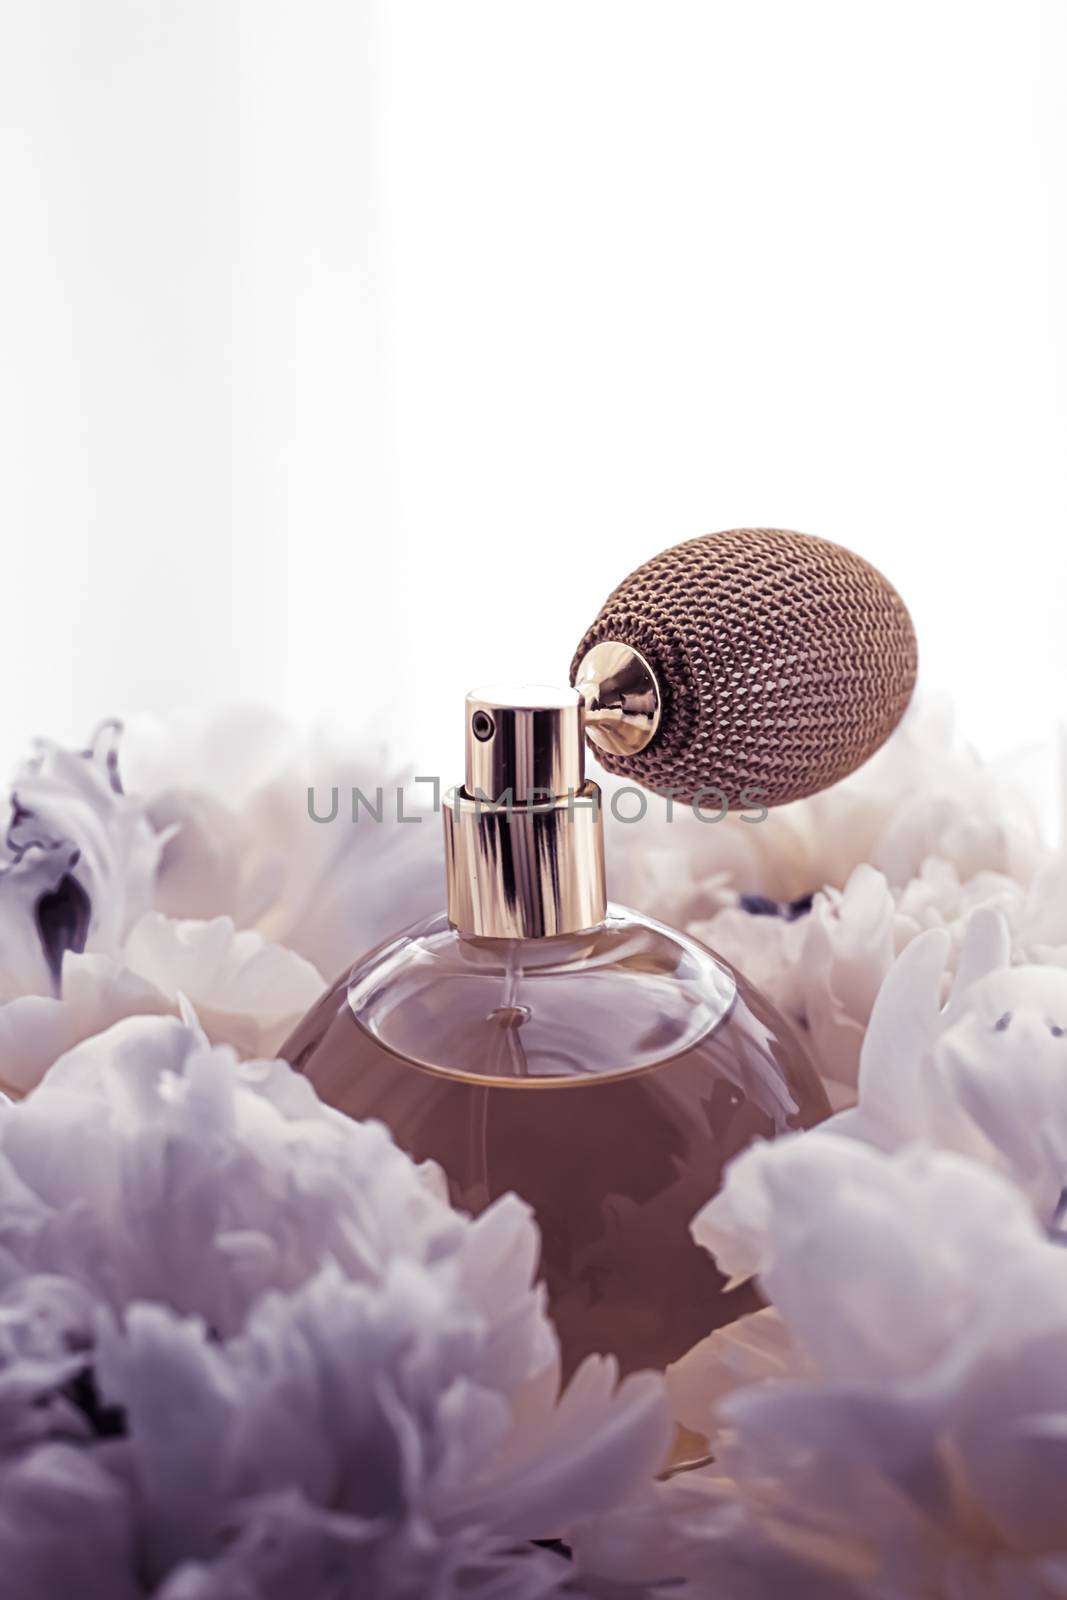 Luxe fragrance bottle as vintage perfume product on violet background and peony flowers, parfum ad and beauty branding design